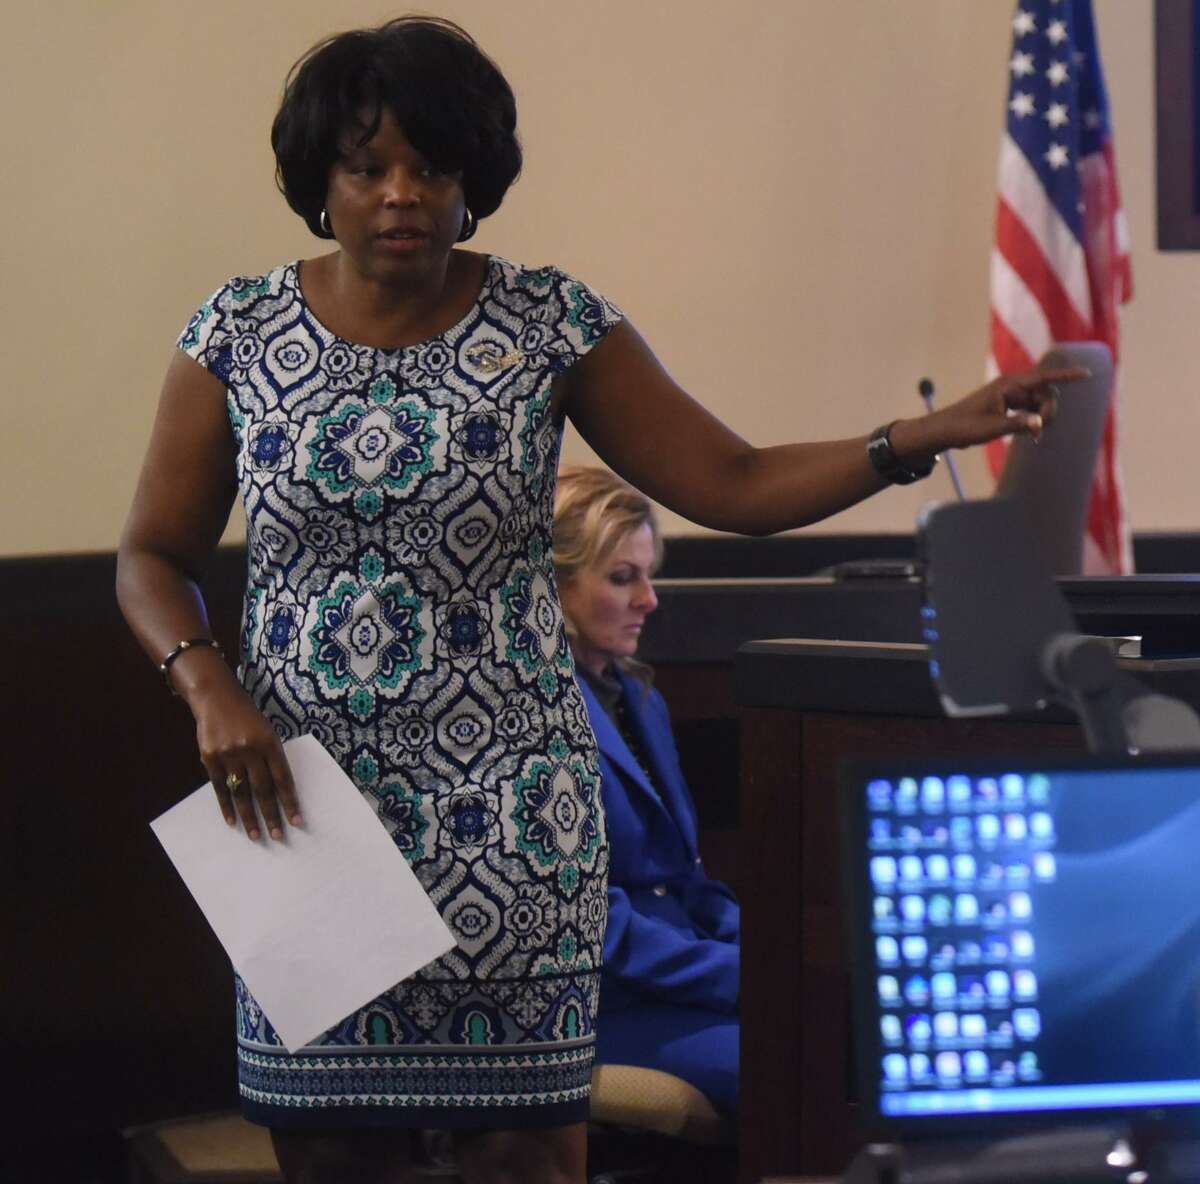 Stephanie Boyd makes a closing argument in court as a prosecutor in September 2017. Boyd was elected to state district court last year and will take the bench for the first time Monday.